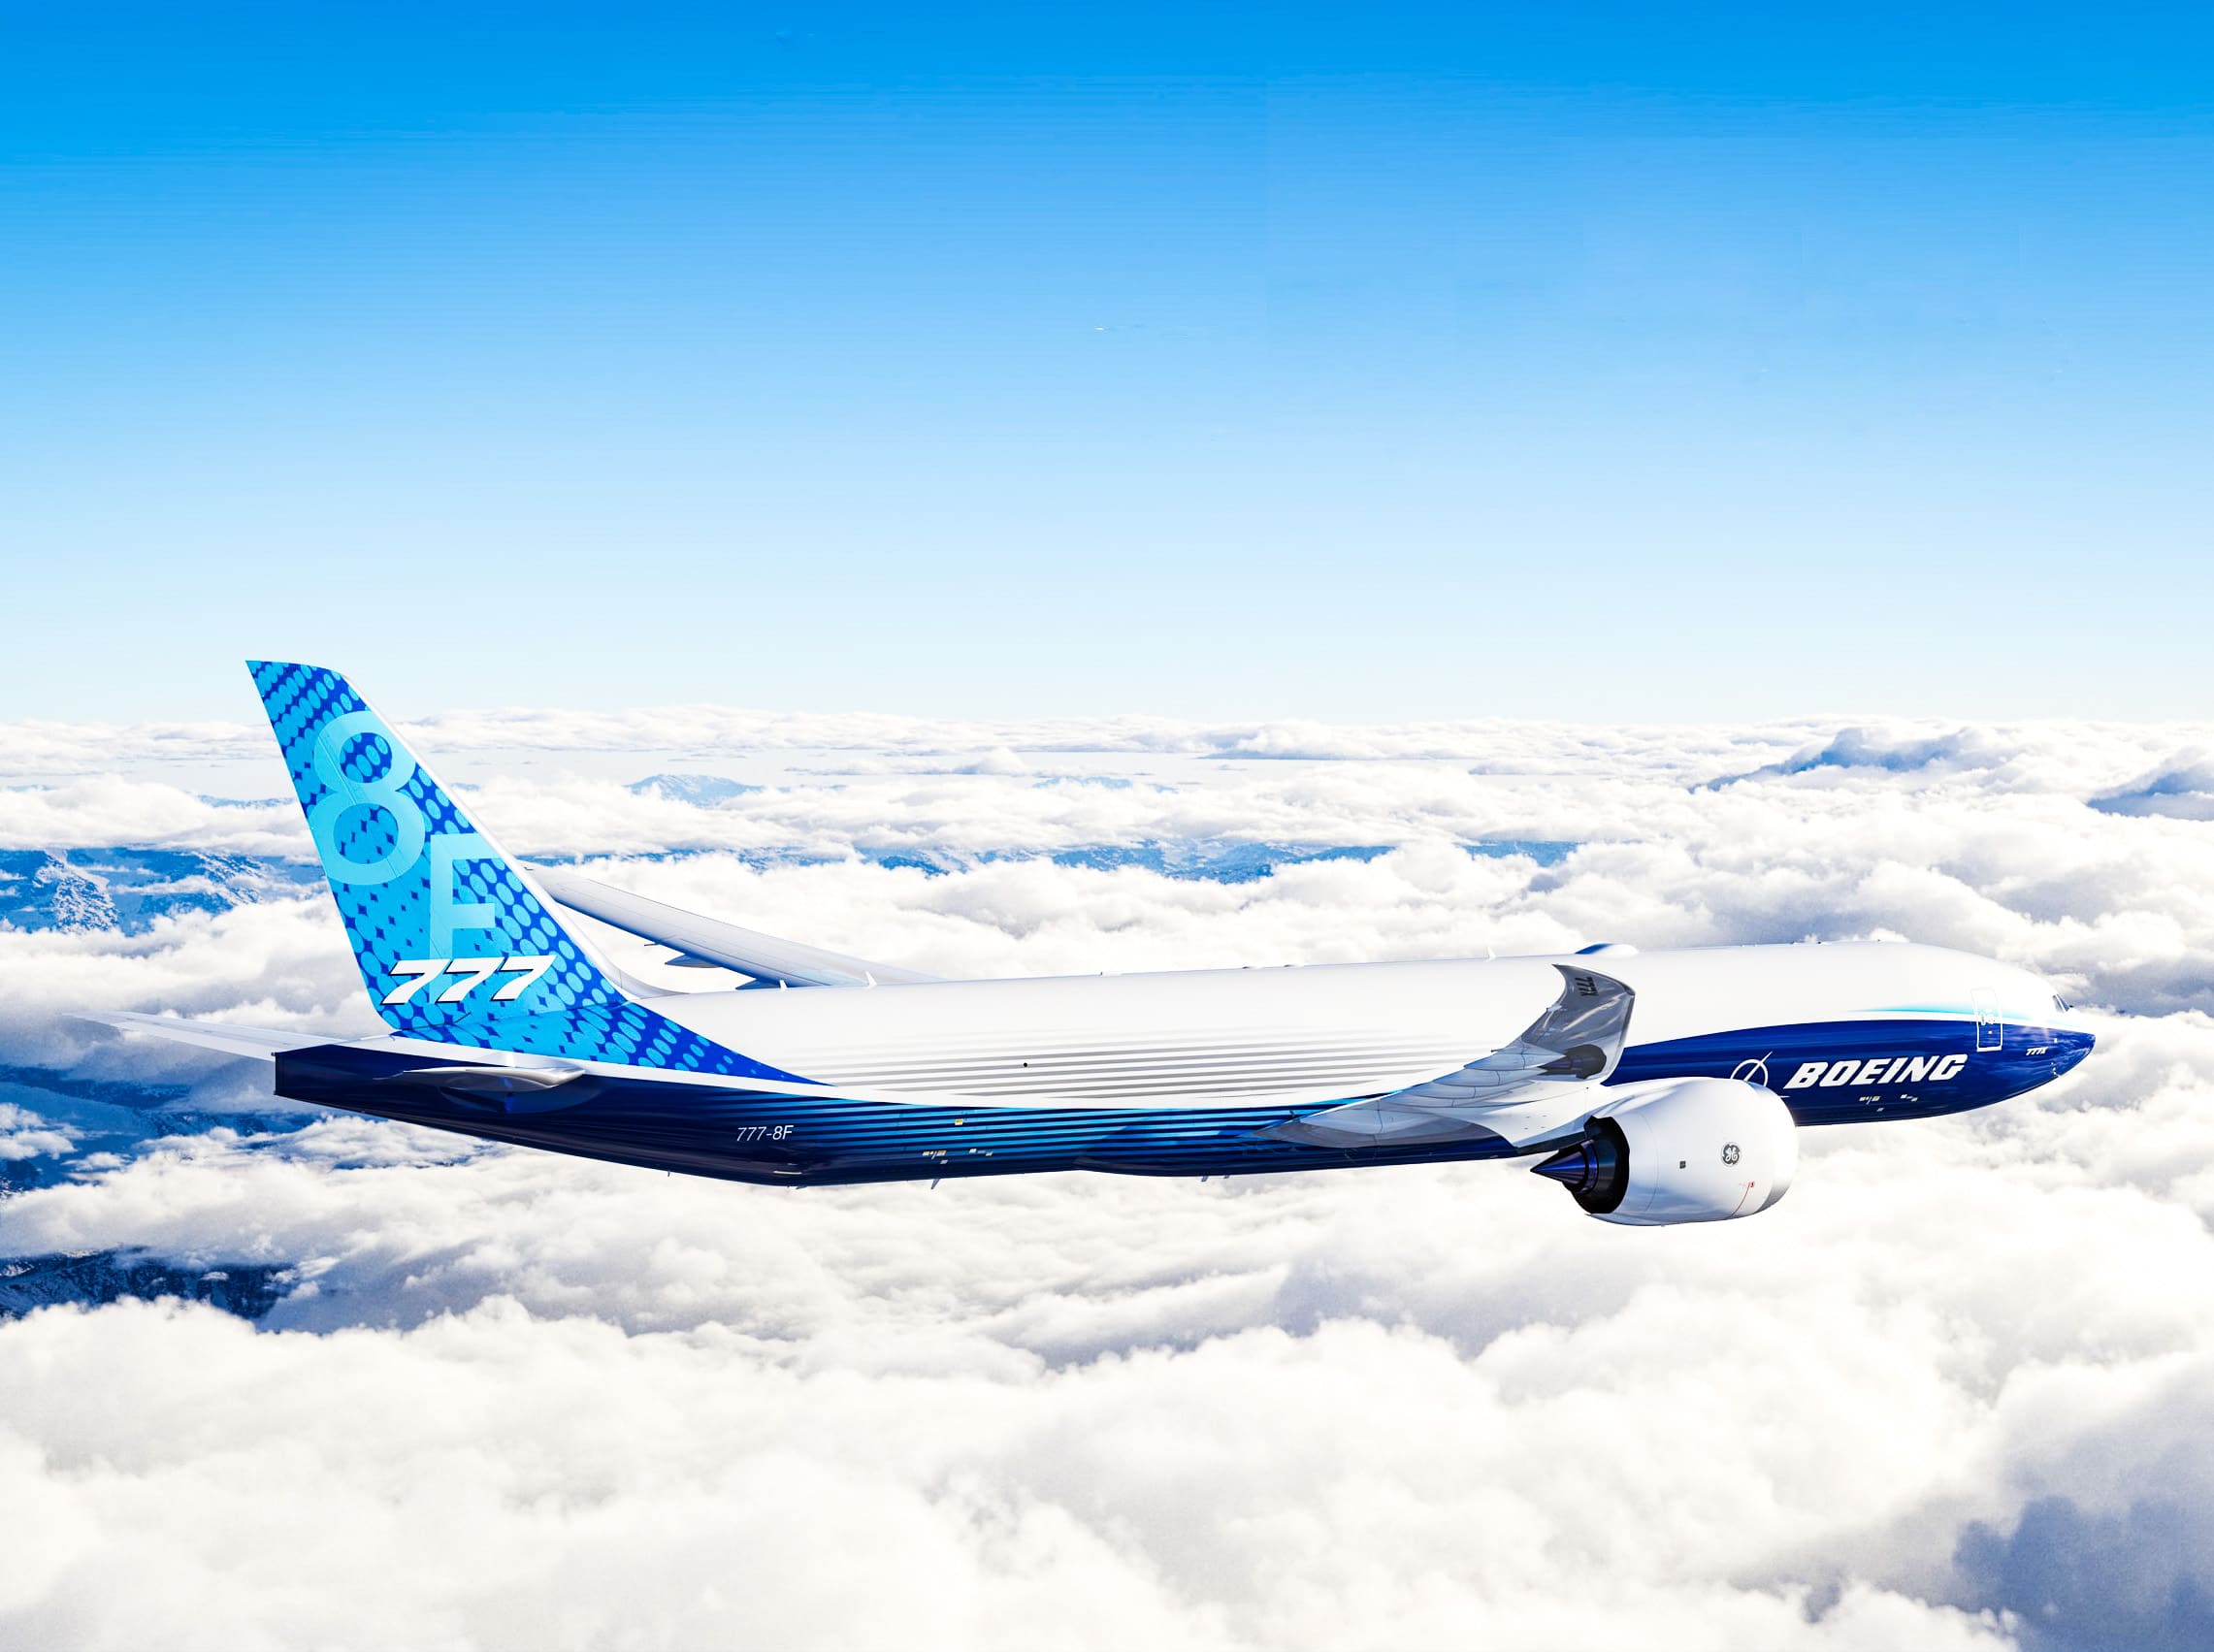 potential-abounds-for-next-gen-widebodies-among-current-747f-operators